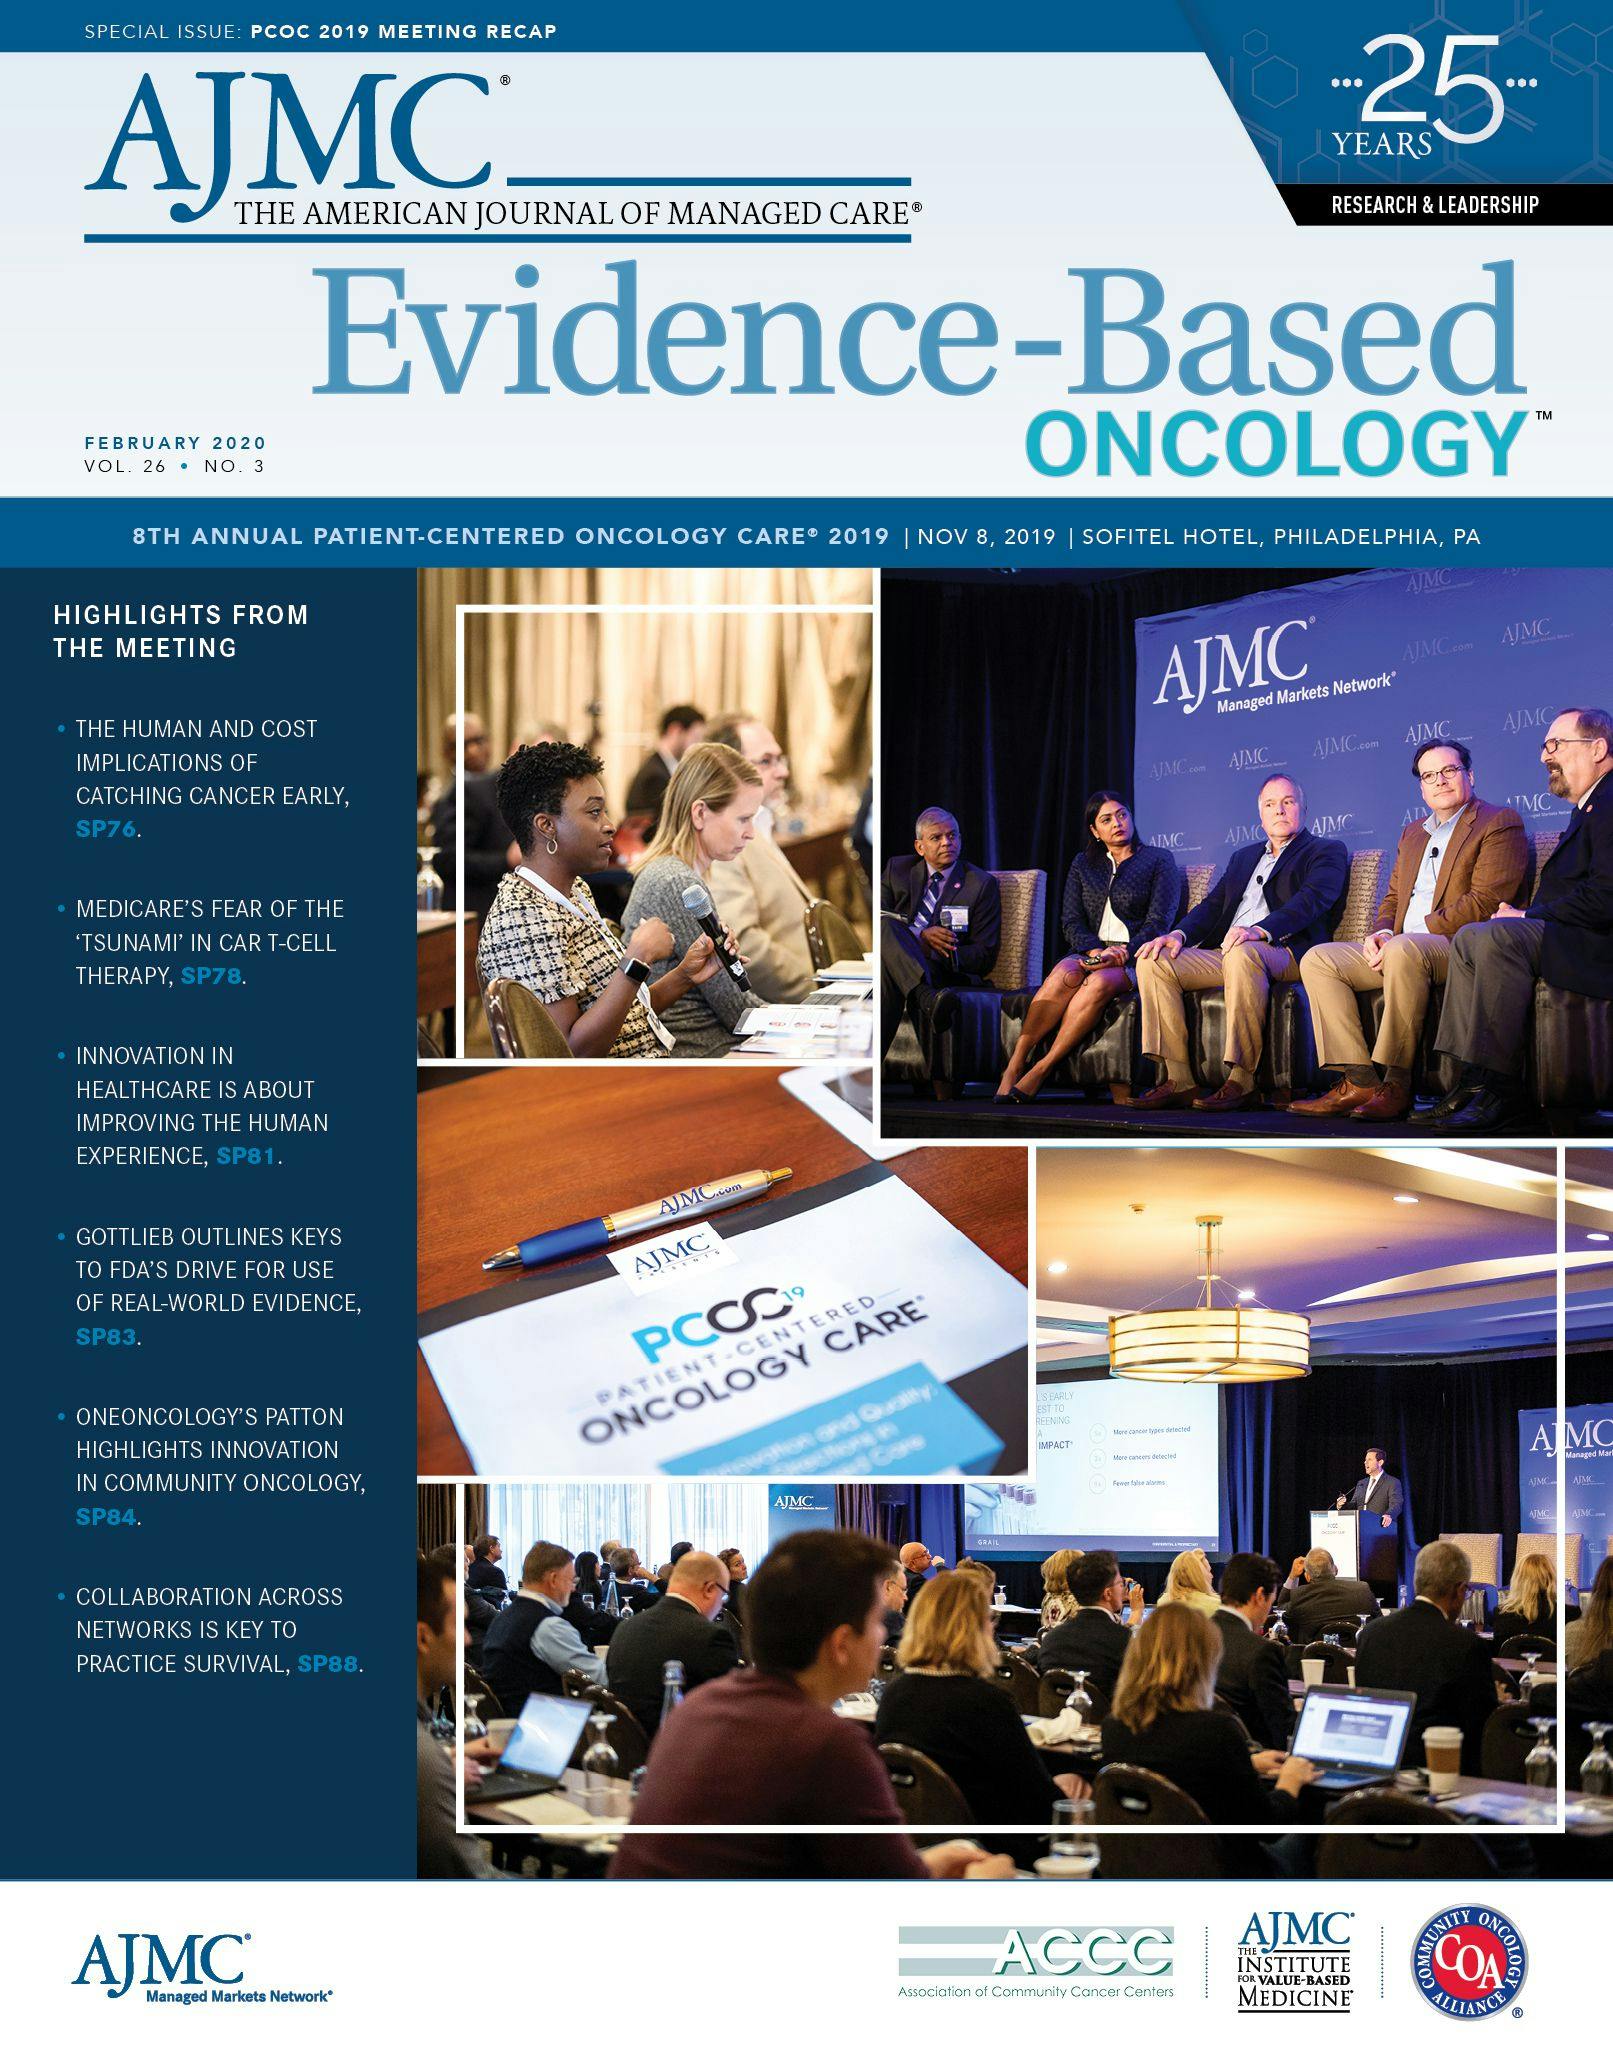 Patient-Centered Oncology Care 2019